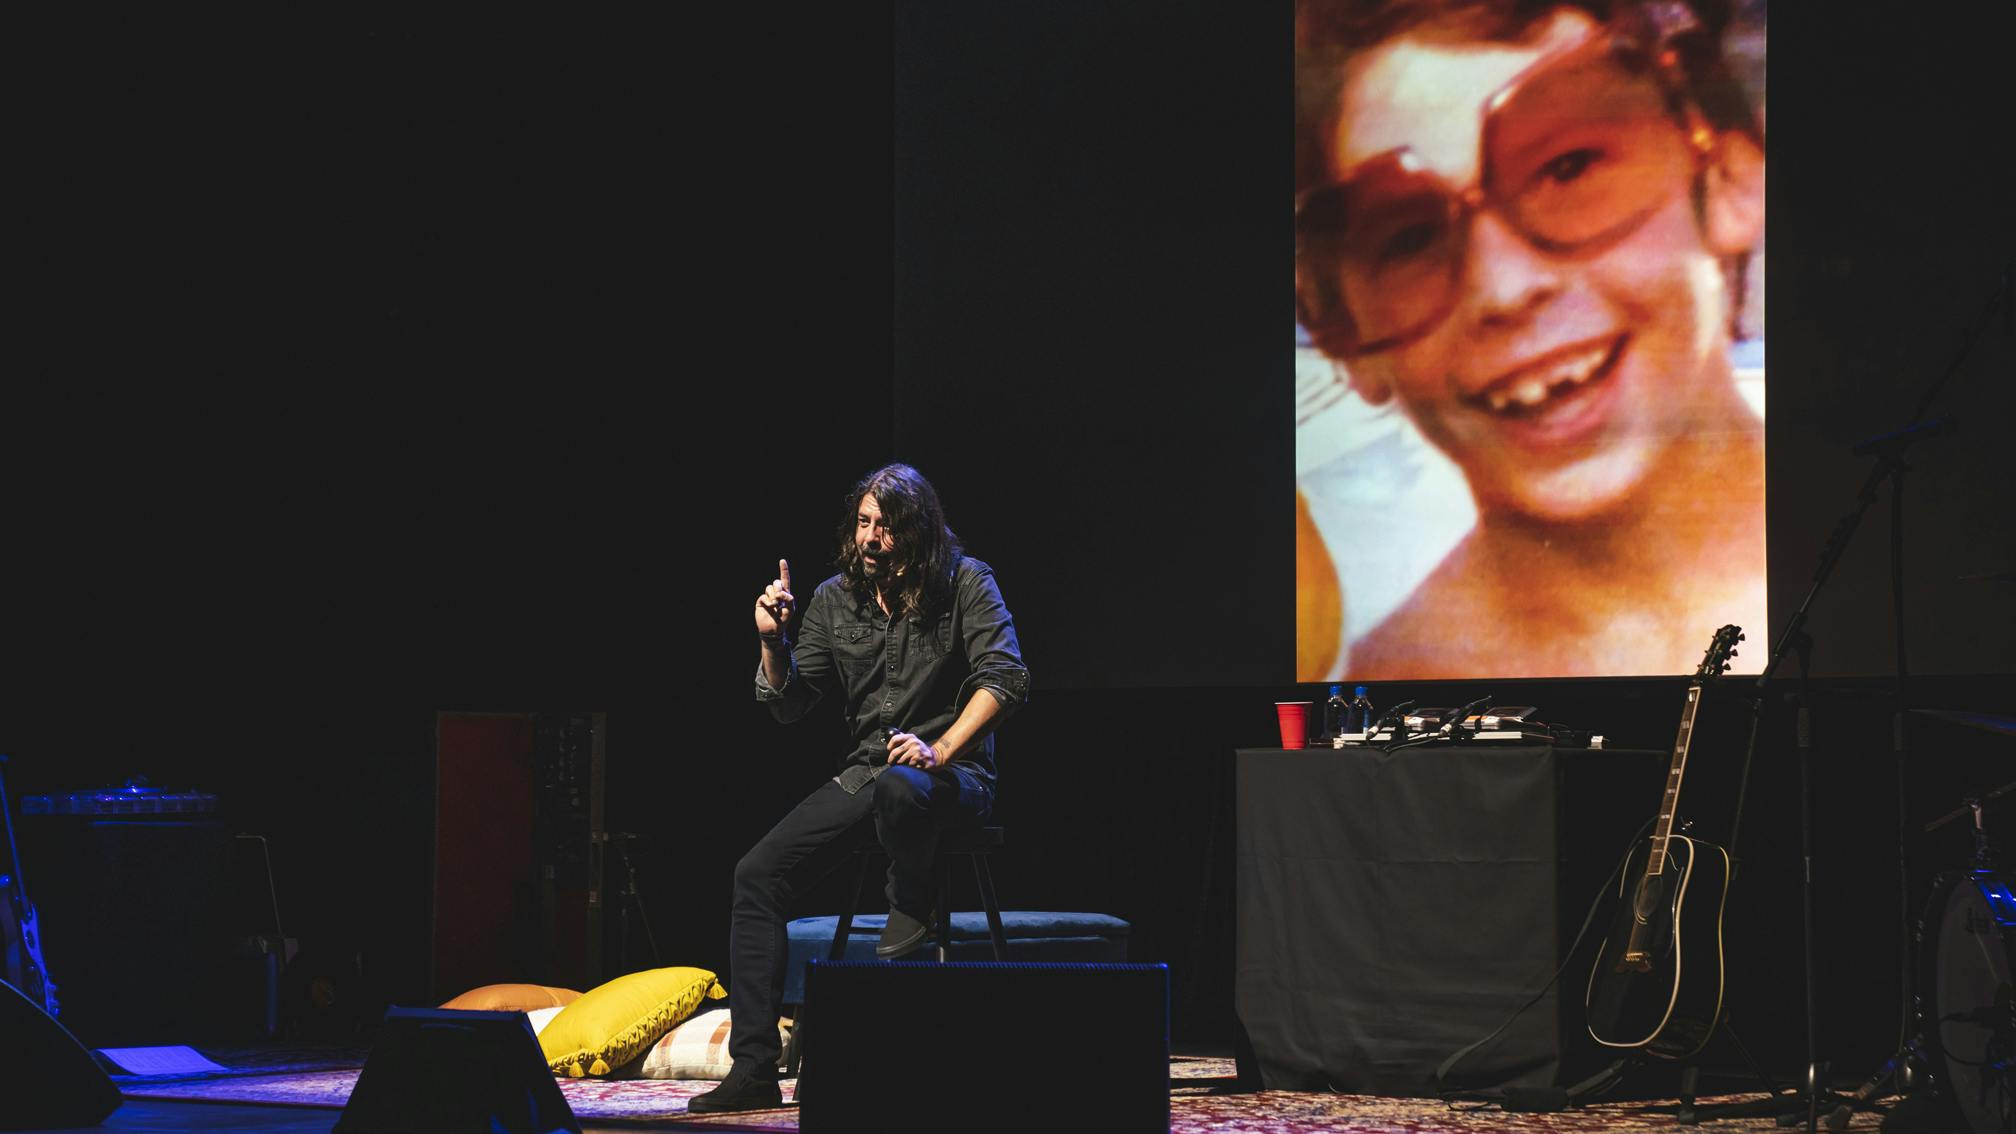 In pictures: Dave Grohl brings The Storyteller to London theatre